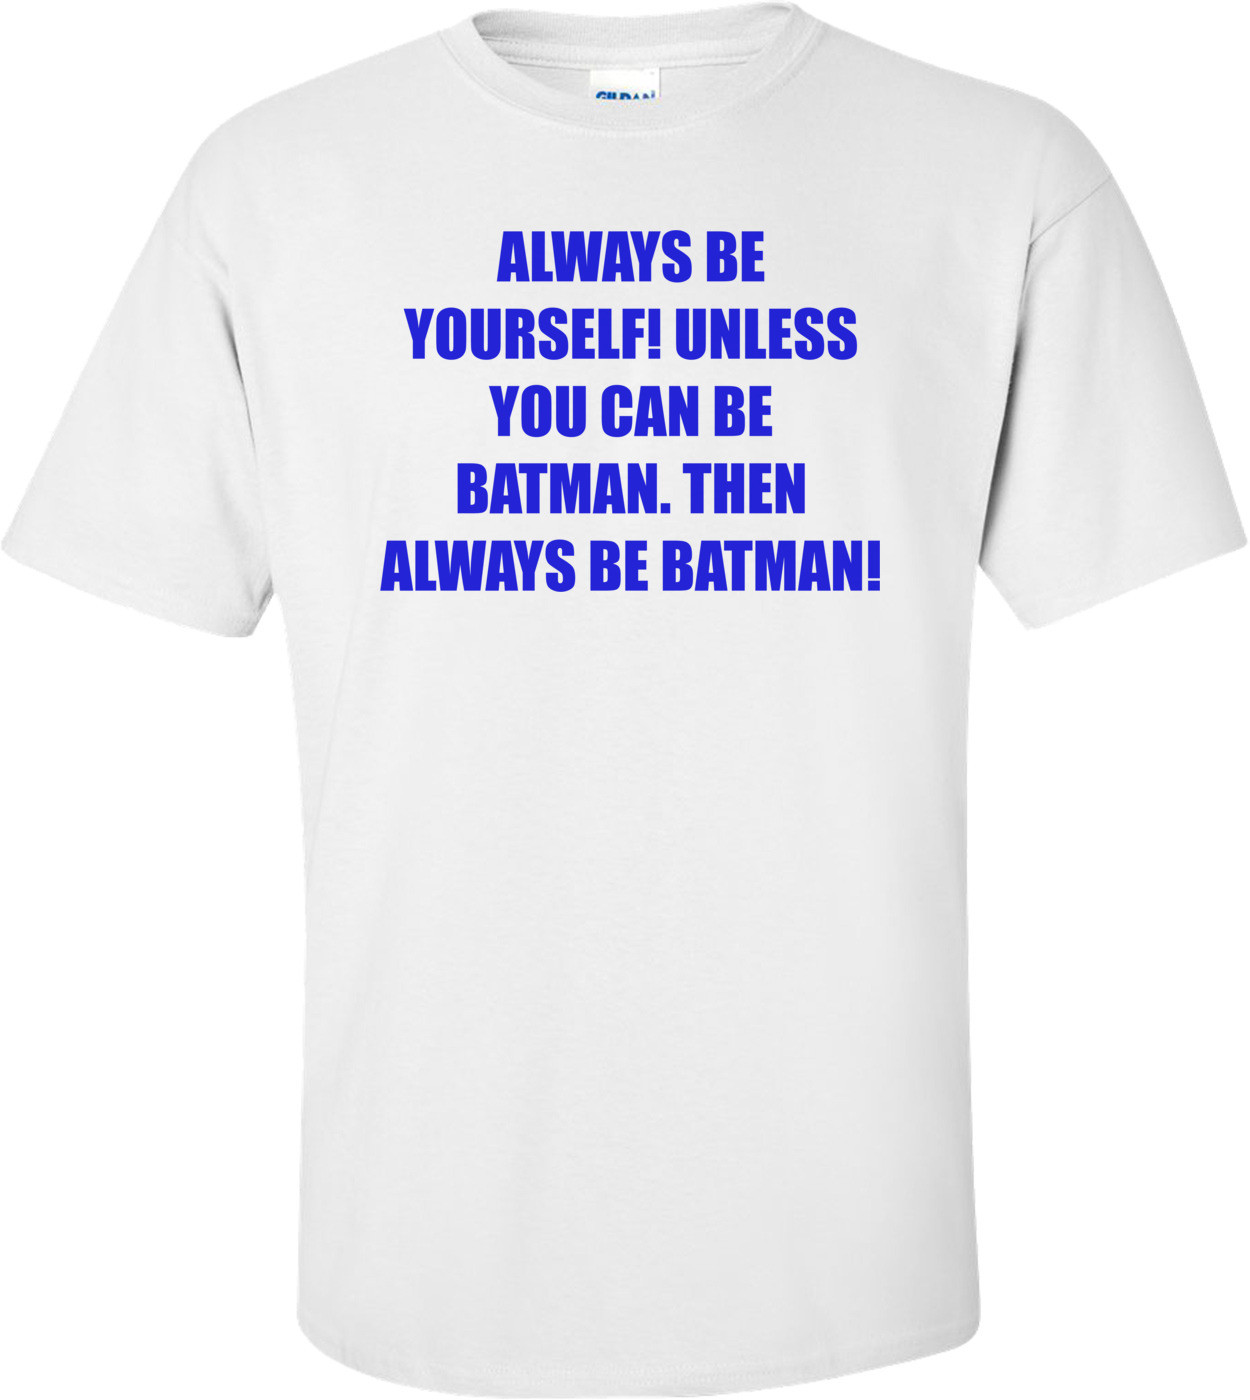 ALWAYS BE YOURSELF! UNLESS YOU CAN BE BATMAN. THEN ALWAYS BE BATMAN! Shirt